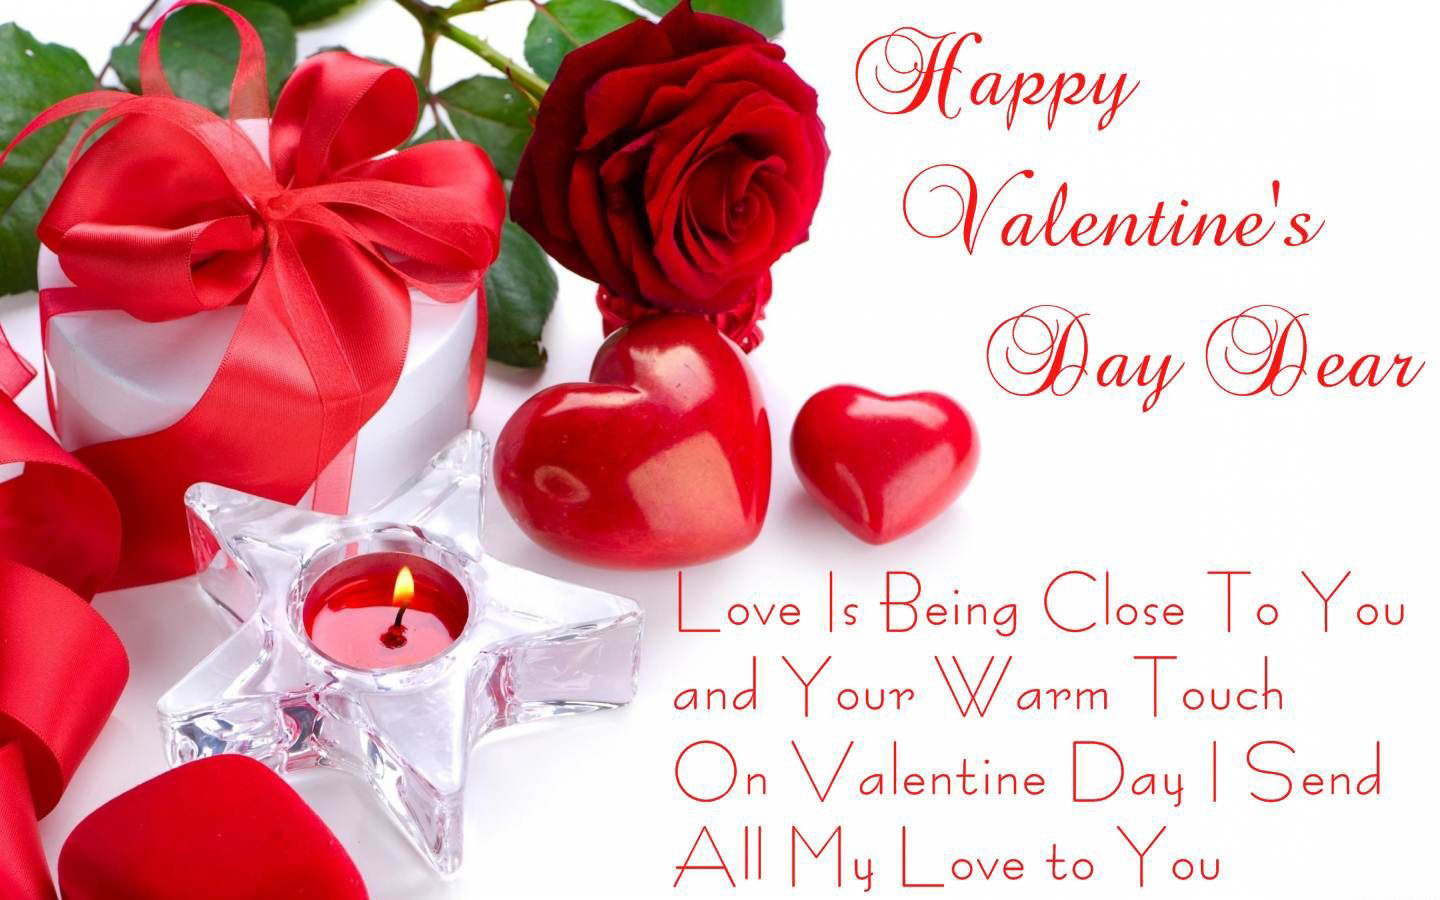 Valentines Day 2019 flowers Greeting Love card quote